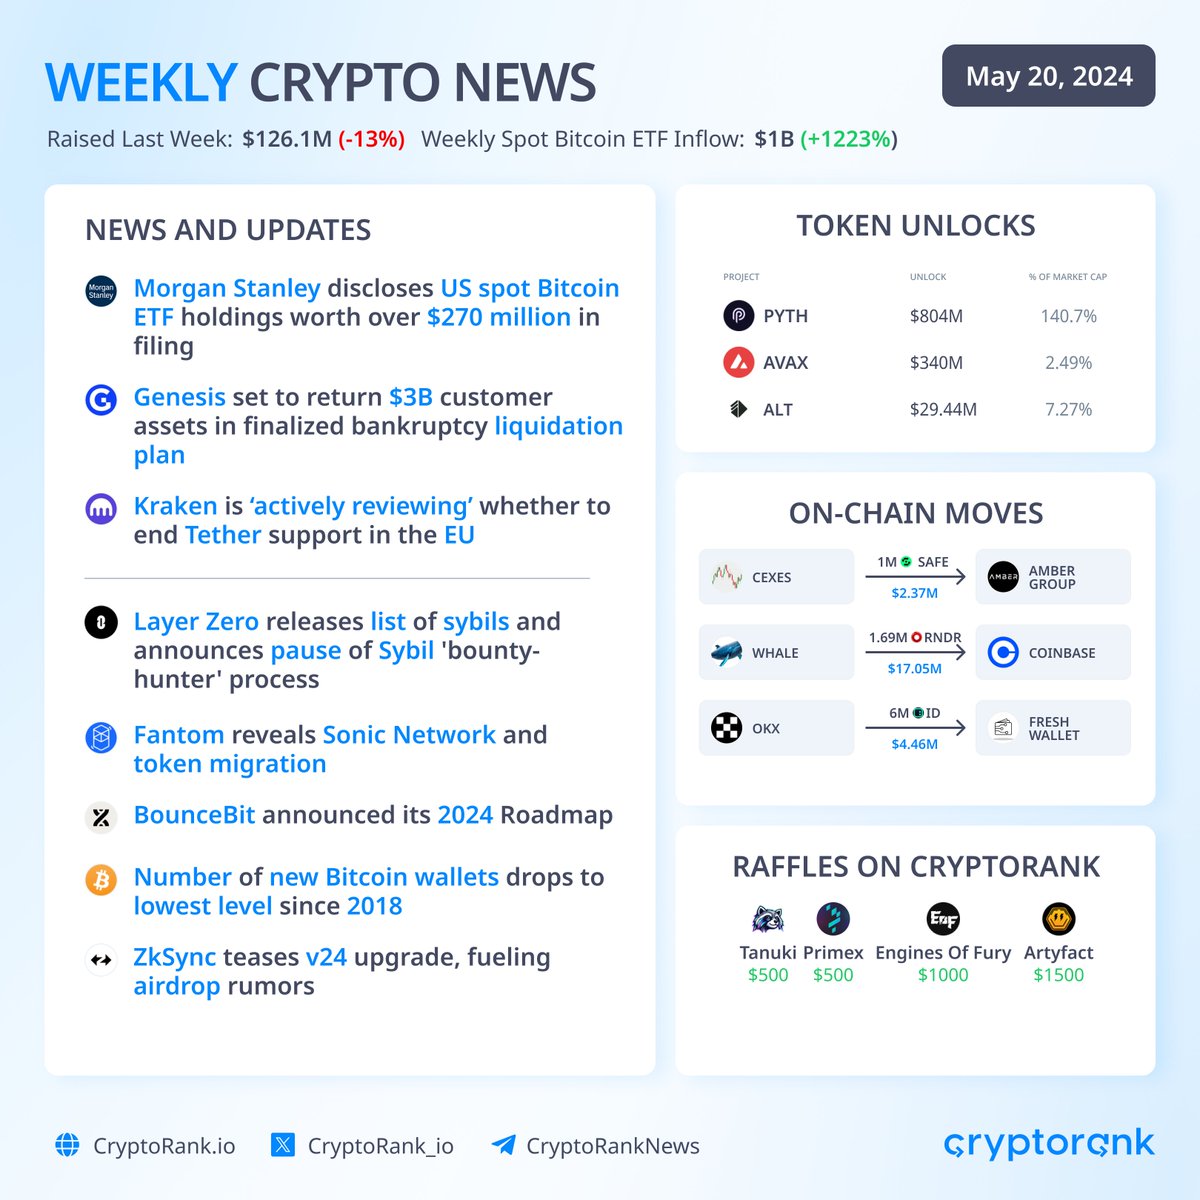 Weekly Crypto News  📣

👉 News:
— Morgan Stanley discloses US spot Bitcoin ETF holdings worth over $270 million in filing
— Genesis set to return $3B customer assets in finalized bankruptcy liquidation plan
— Kraken is ‘actively reviewing’ whether to end Tether support in the EU